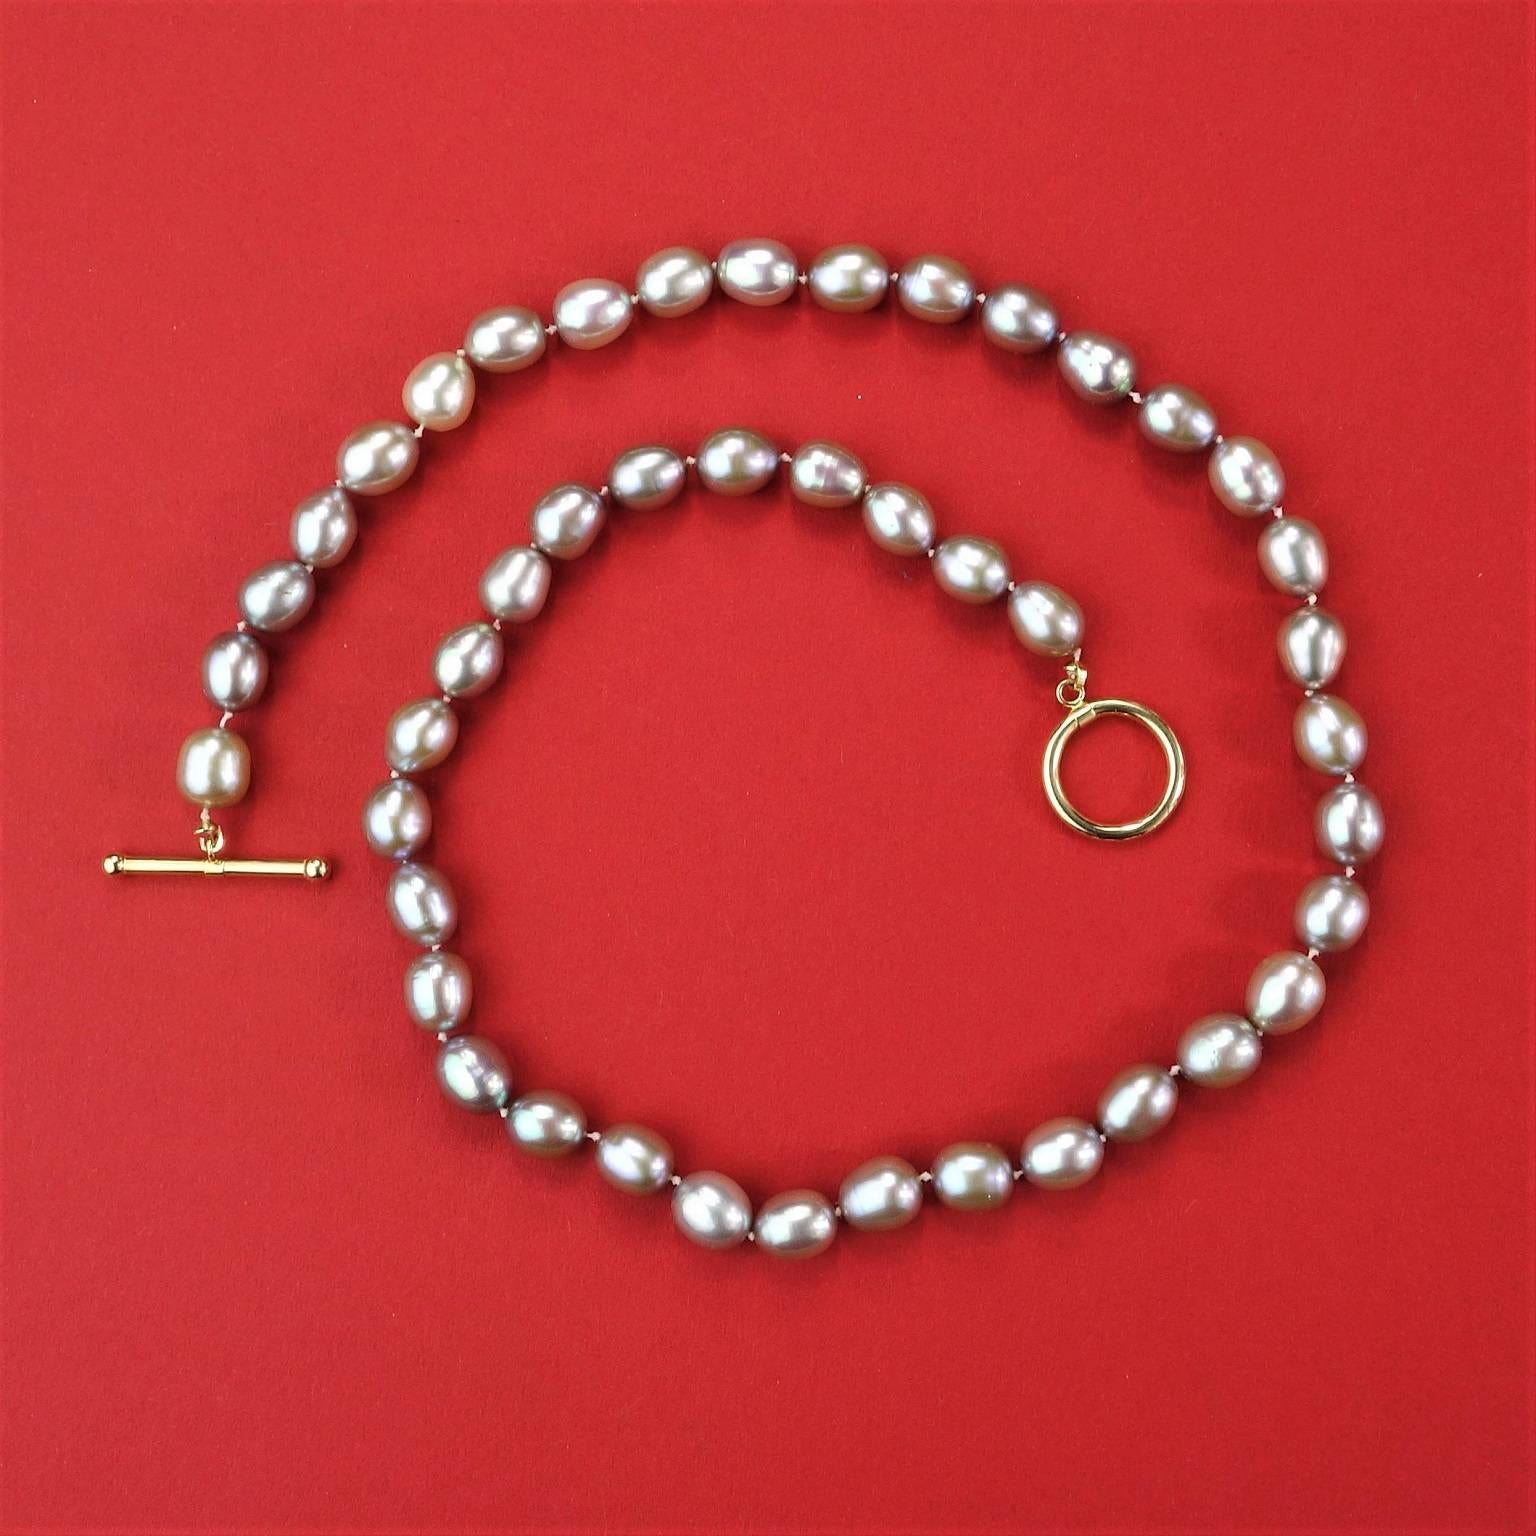 Necklace of iridescent oval (6-7mm) gray pearls with pink and mauve tones. The necklace is hand knotted and secured with a toggle clasp of 14kt yellow gold. The gorgeous necklace is 18 inches long and can be worn all day, every day. Pearl is the